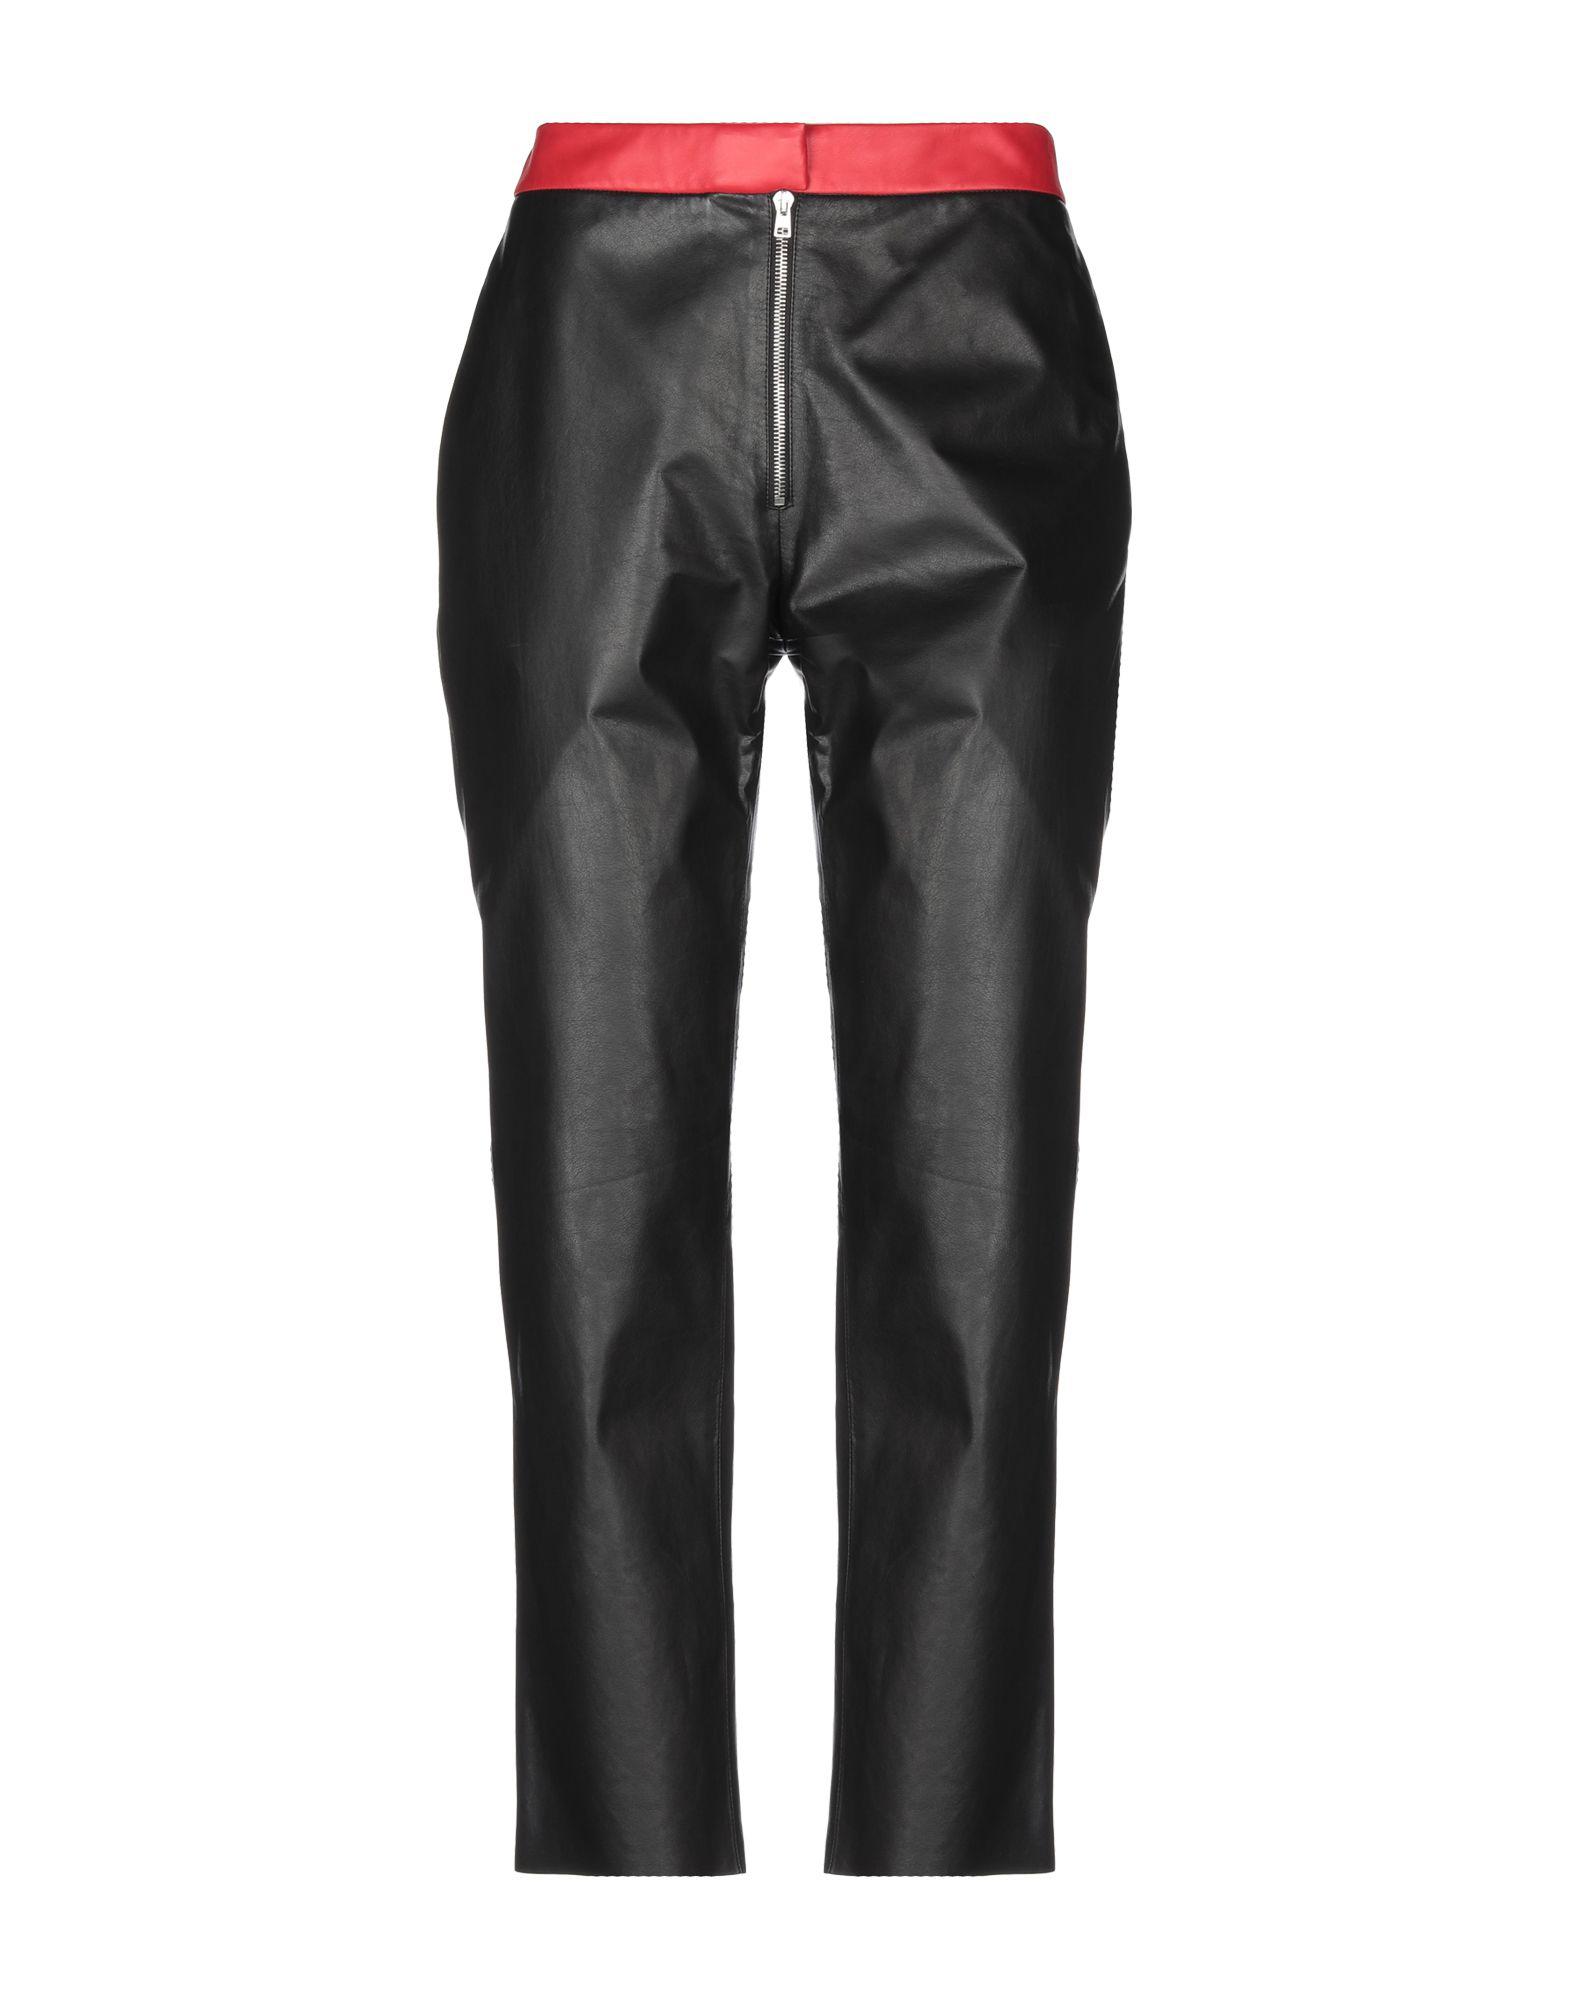 Victoria Beckham Leather Casual Pants in Black - Lyst